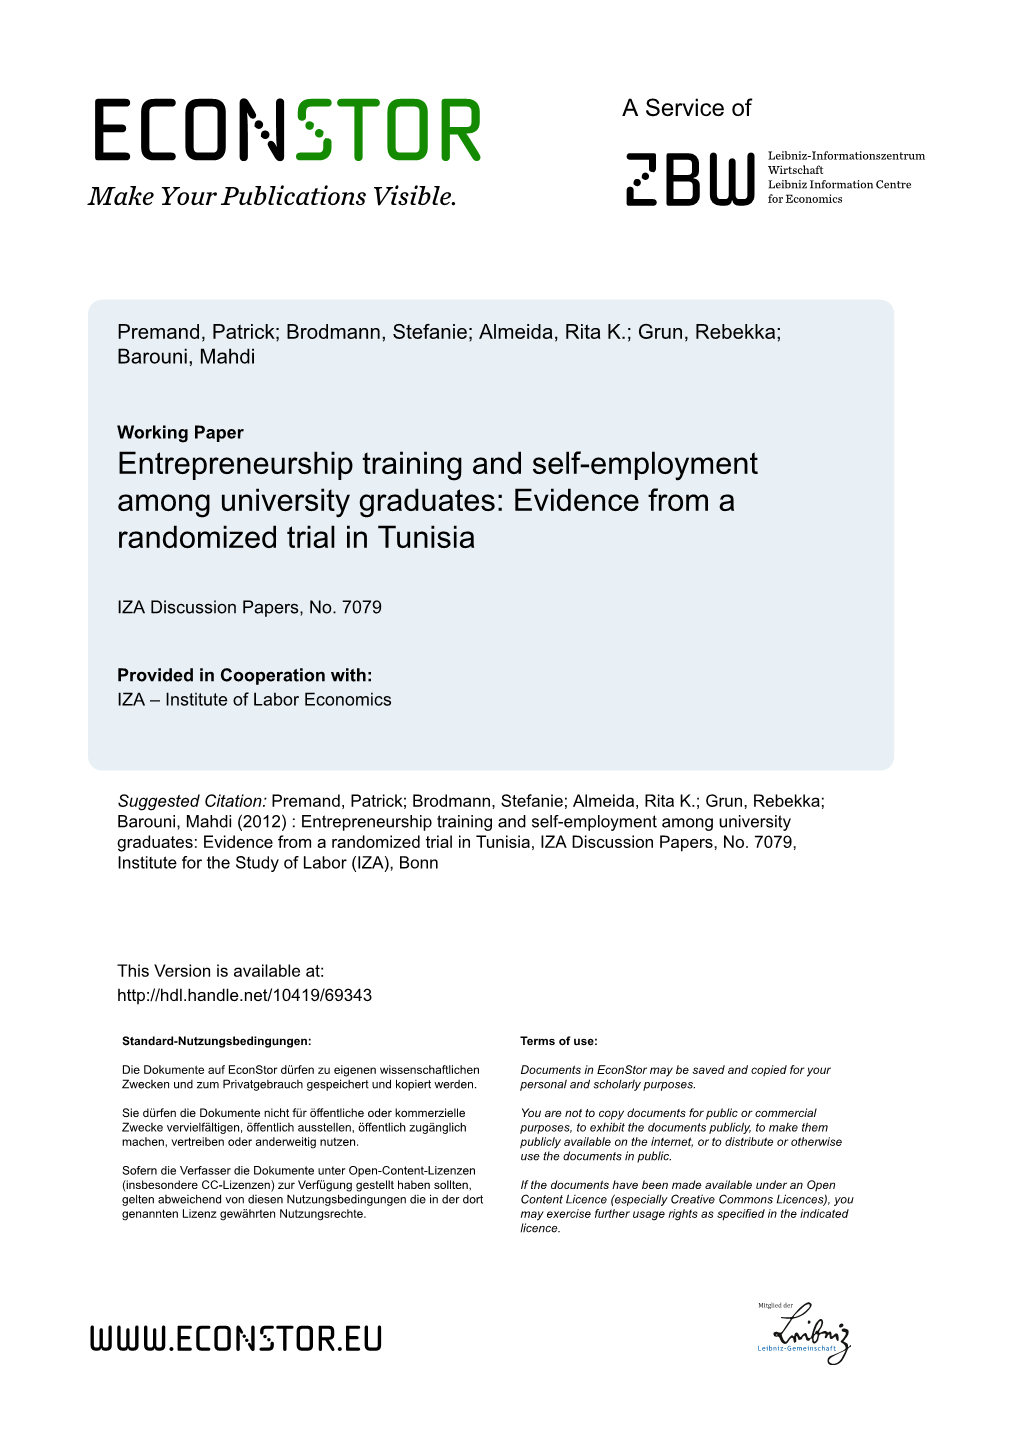 Entrepreneurship Training and Self-Employment Among University Graduates: Evidence from a Randomized Trial in Tunisia